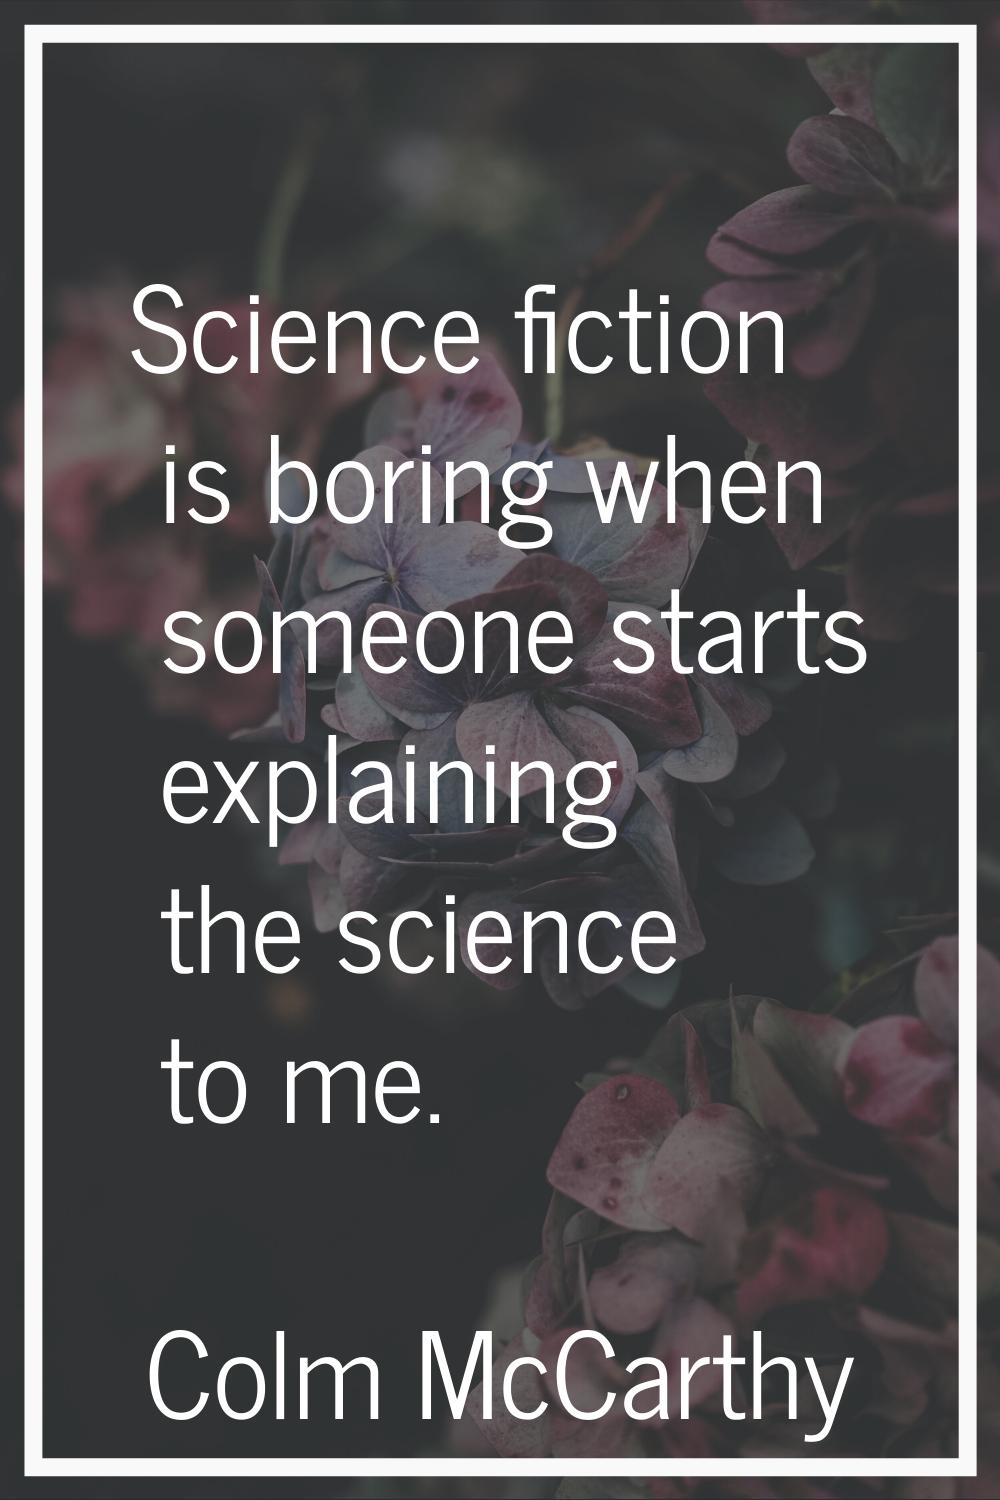 Science fiction is boring when someone starts explaining the science to me.